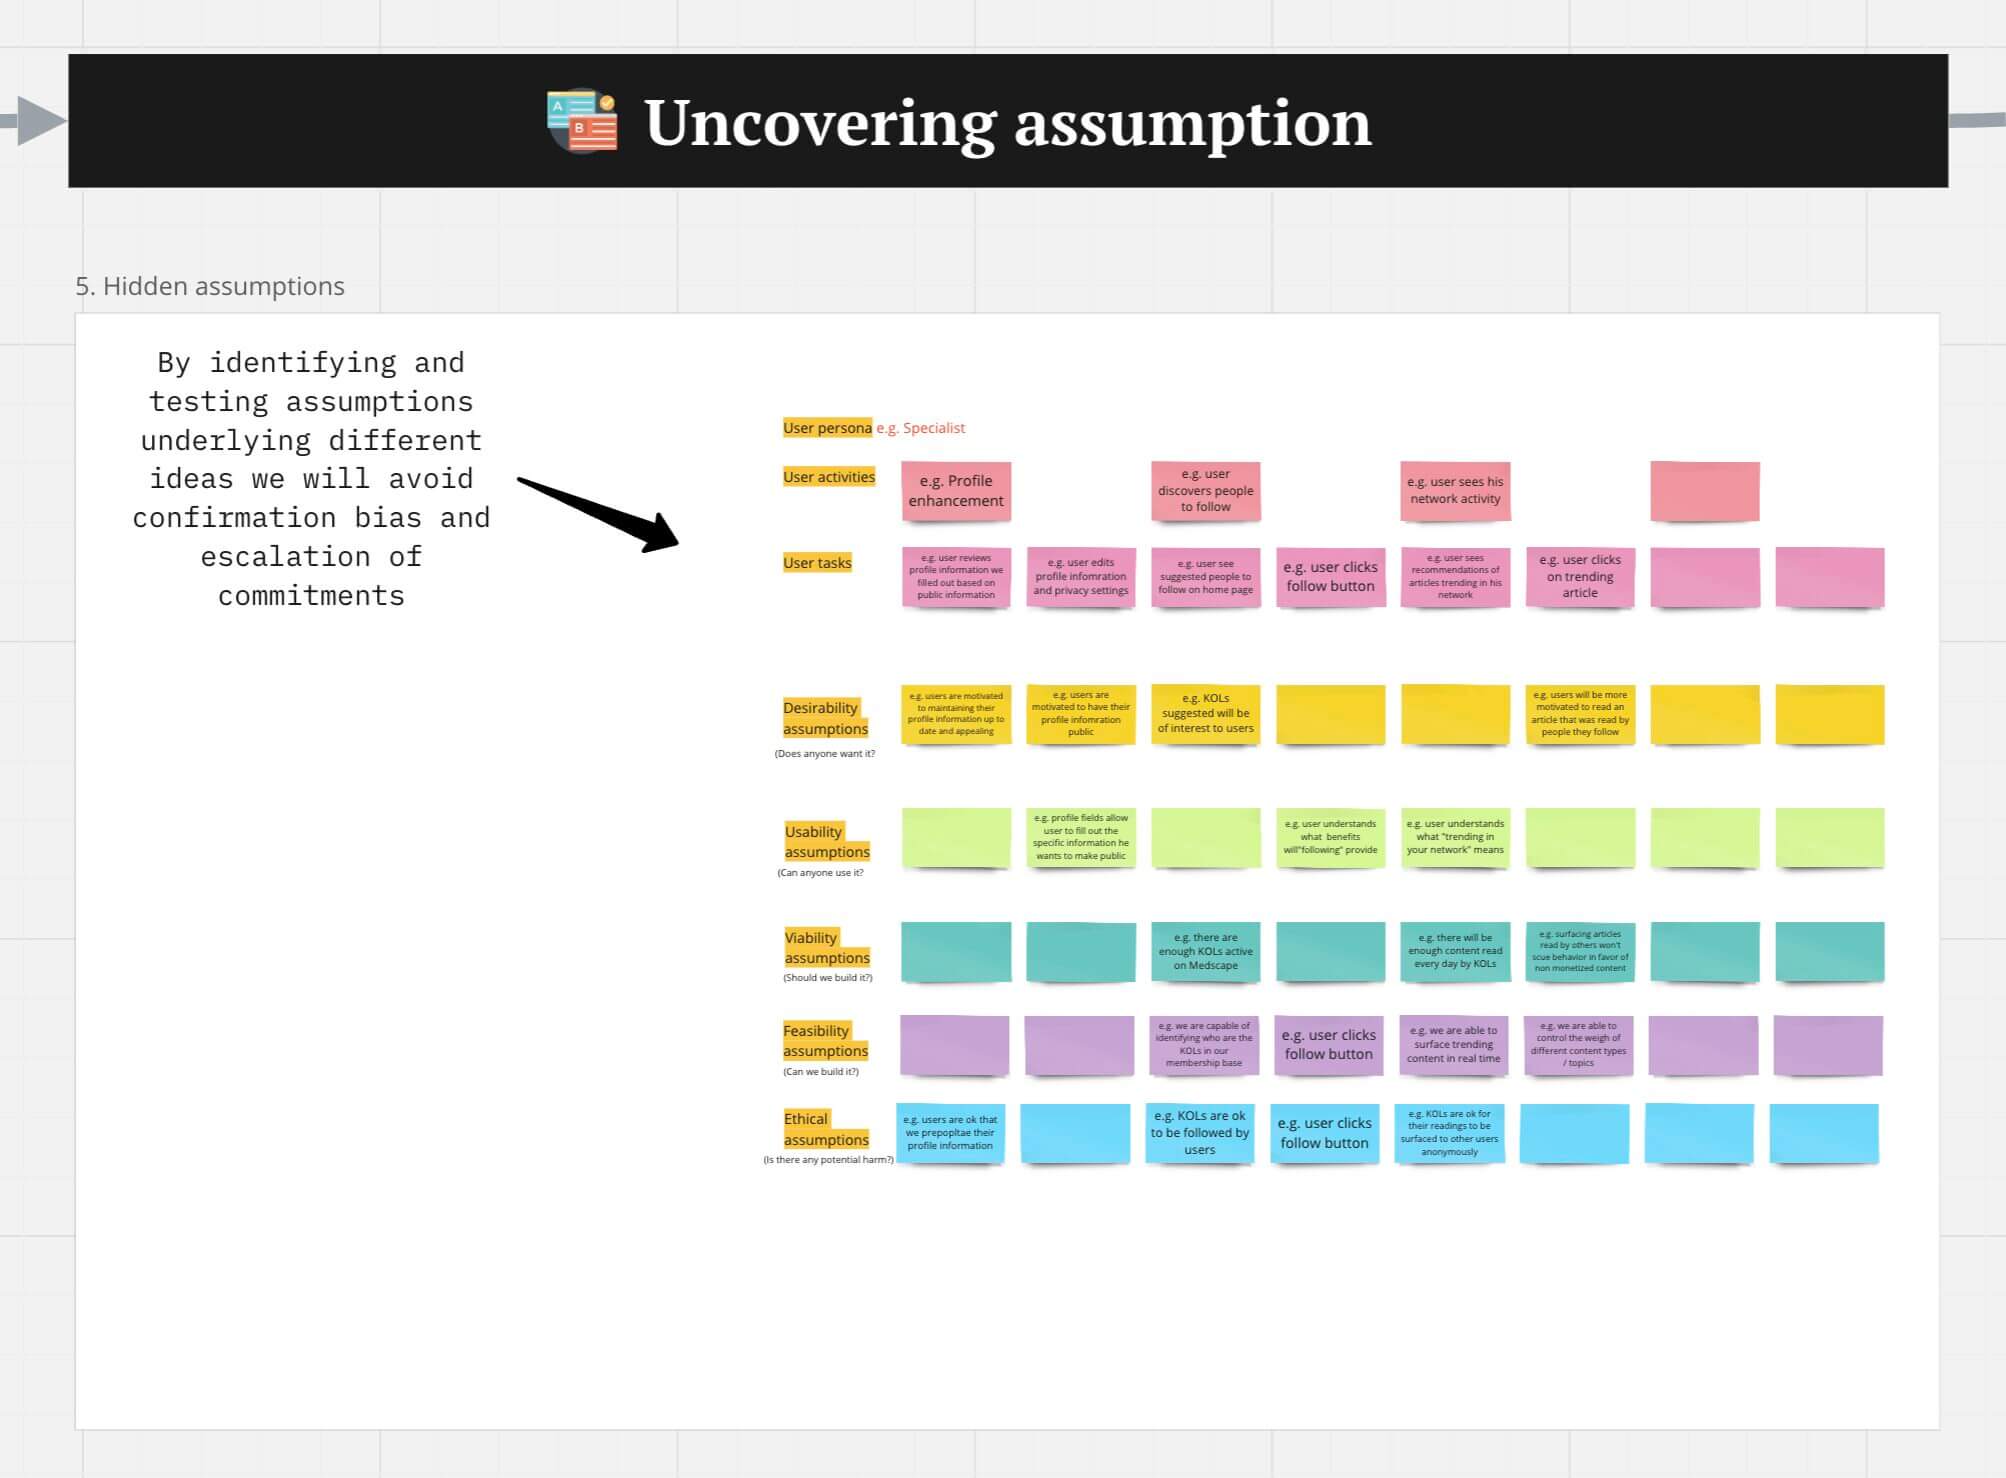 A screenshot from a Miro board with colorful sticky notes arranged into rows and columns, labeled "Uncovering assumption."